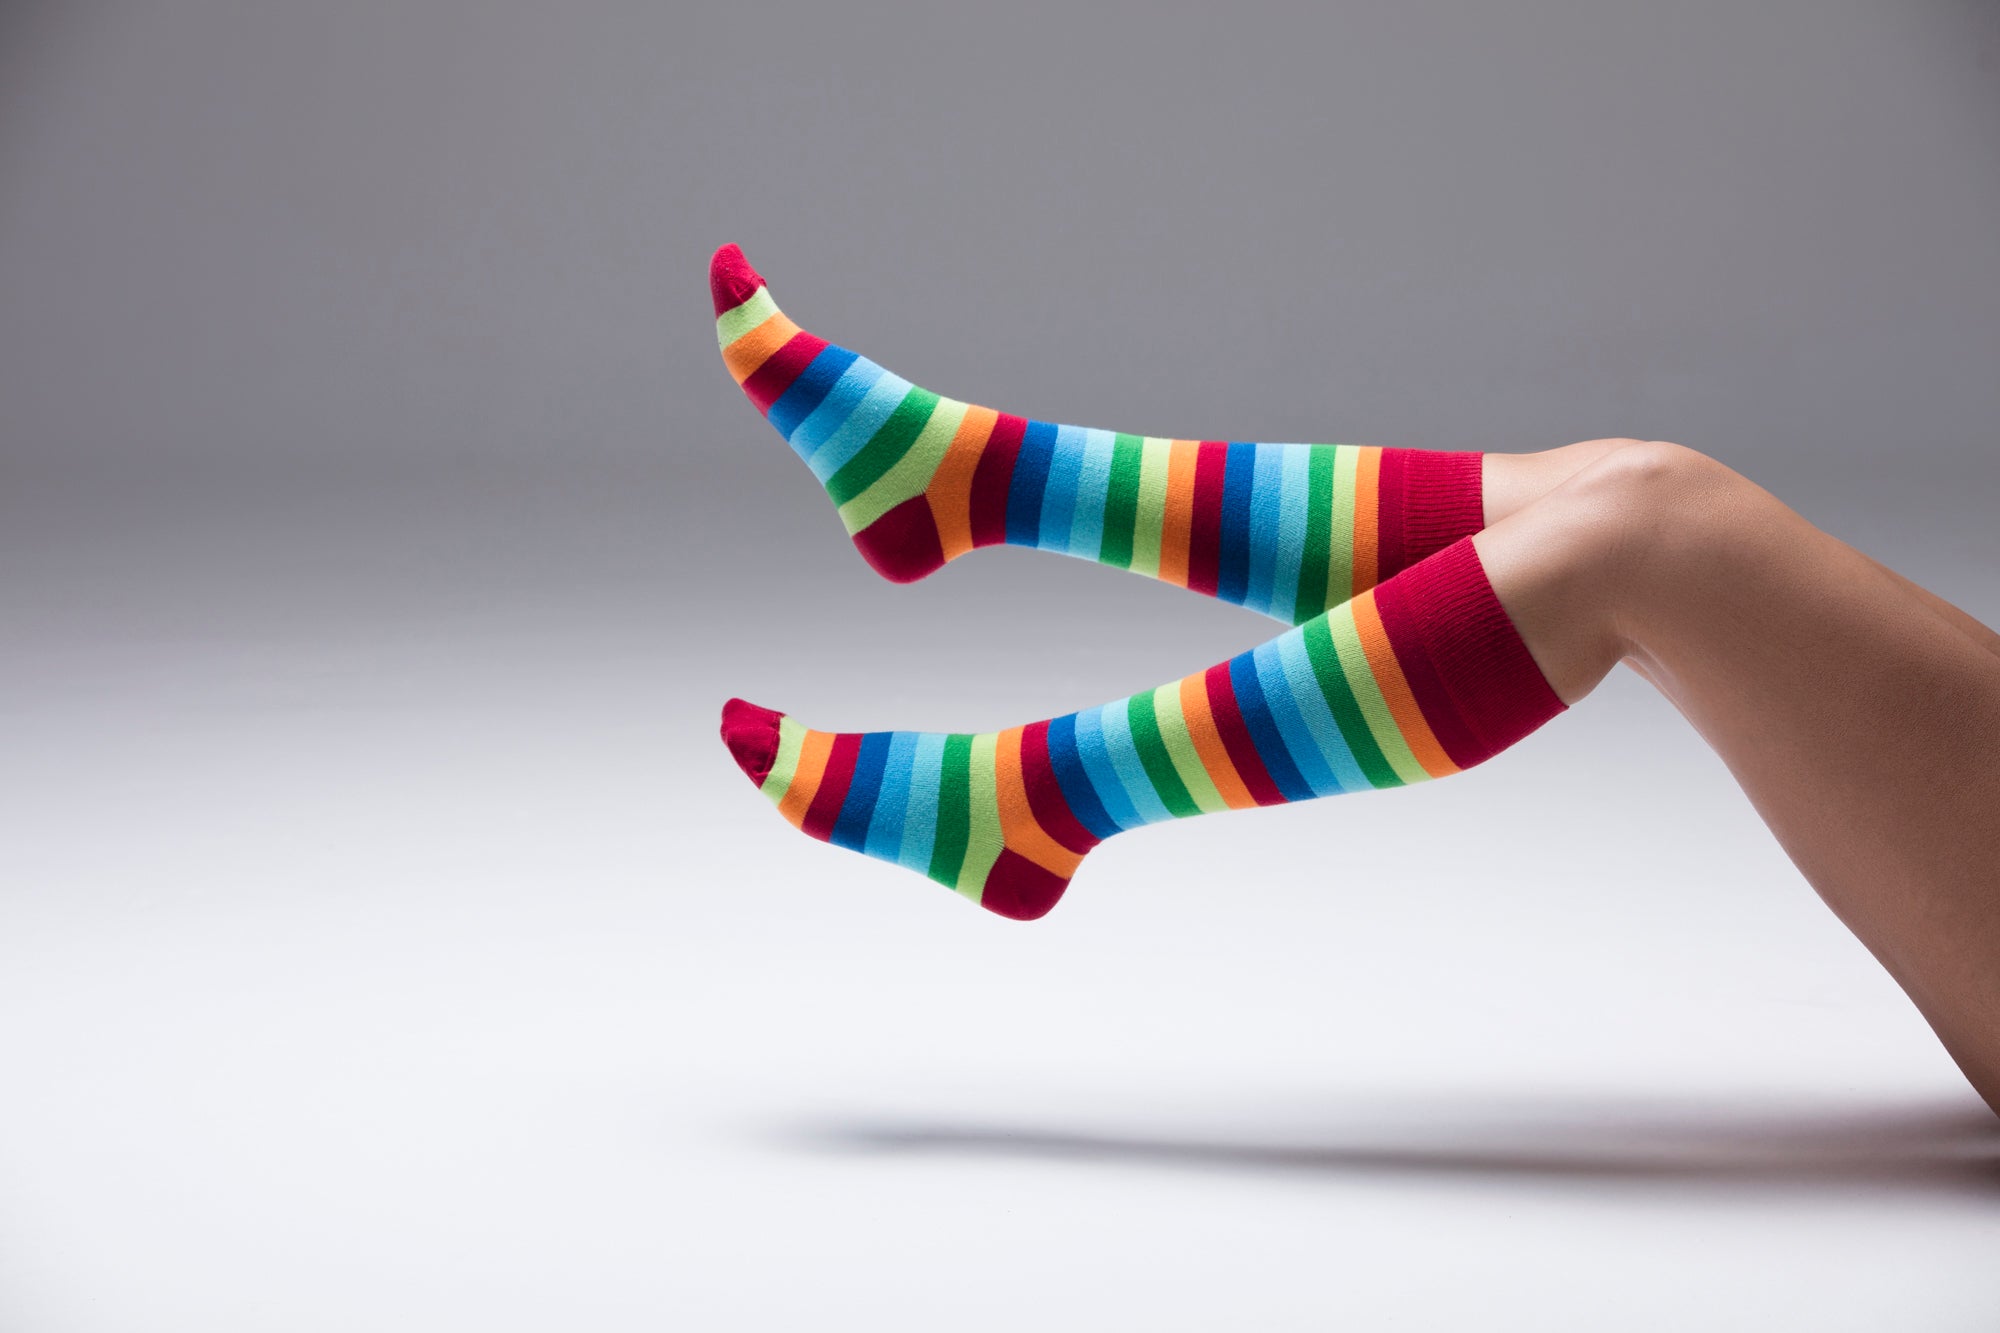 Important Factors to Consider when Buying High Quality Socks Online